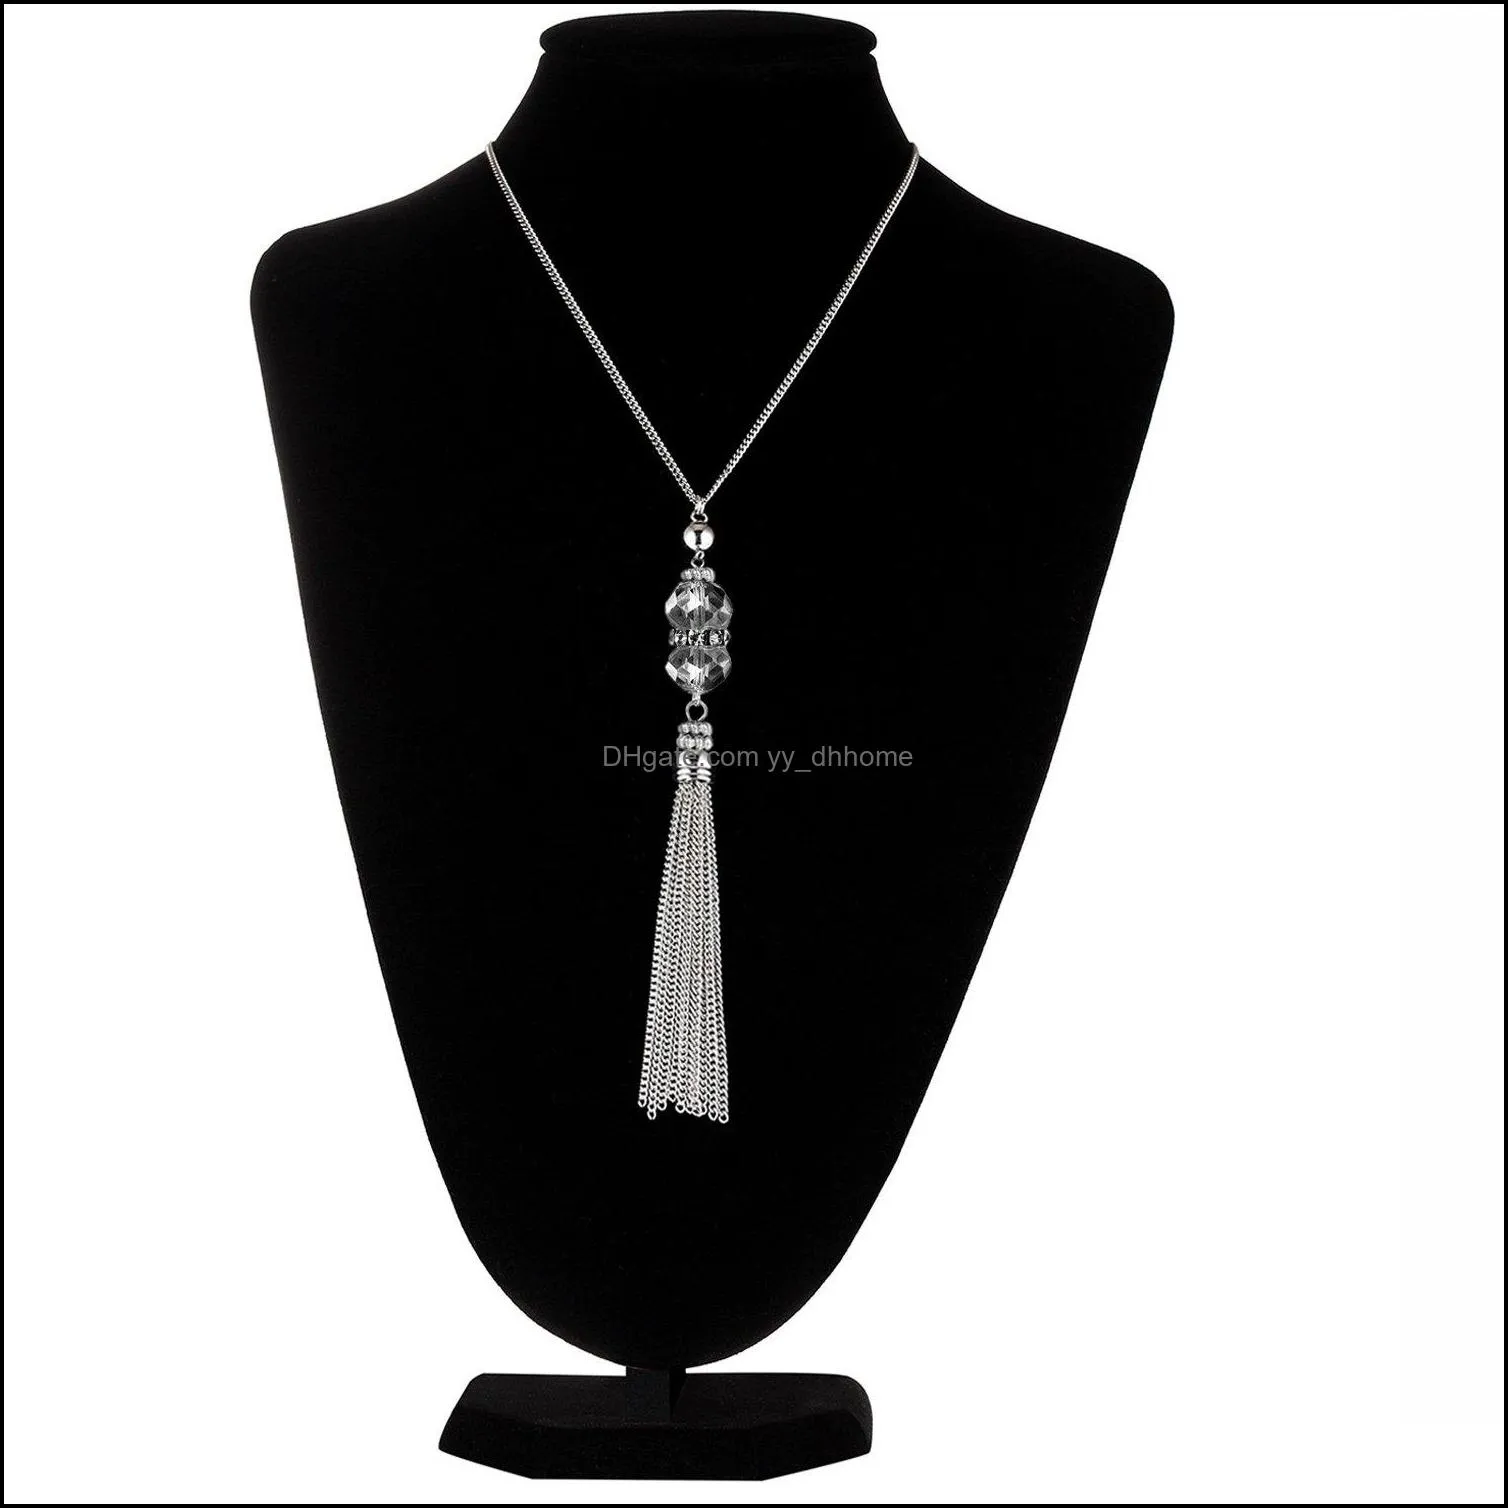  crystal bead sweater chain necklace for women fashion silver color tassel pendant long statement necklaces jewelry